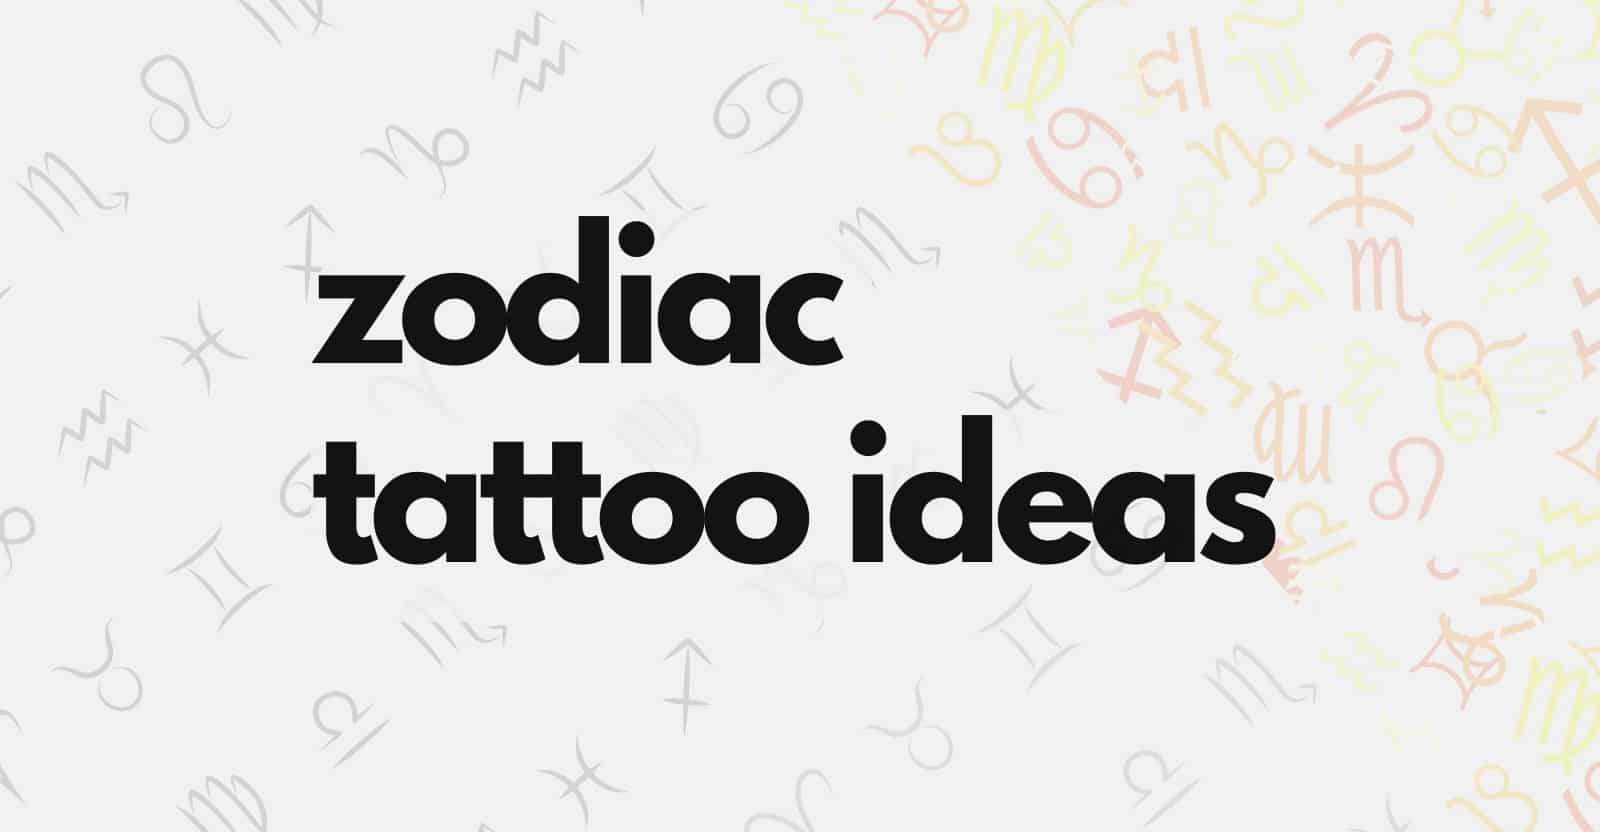 astrology-themed tattoo designs